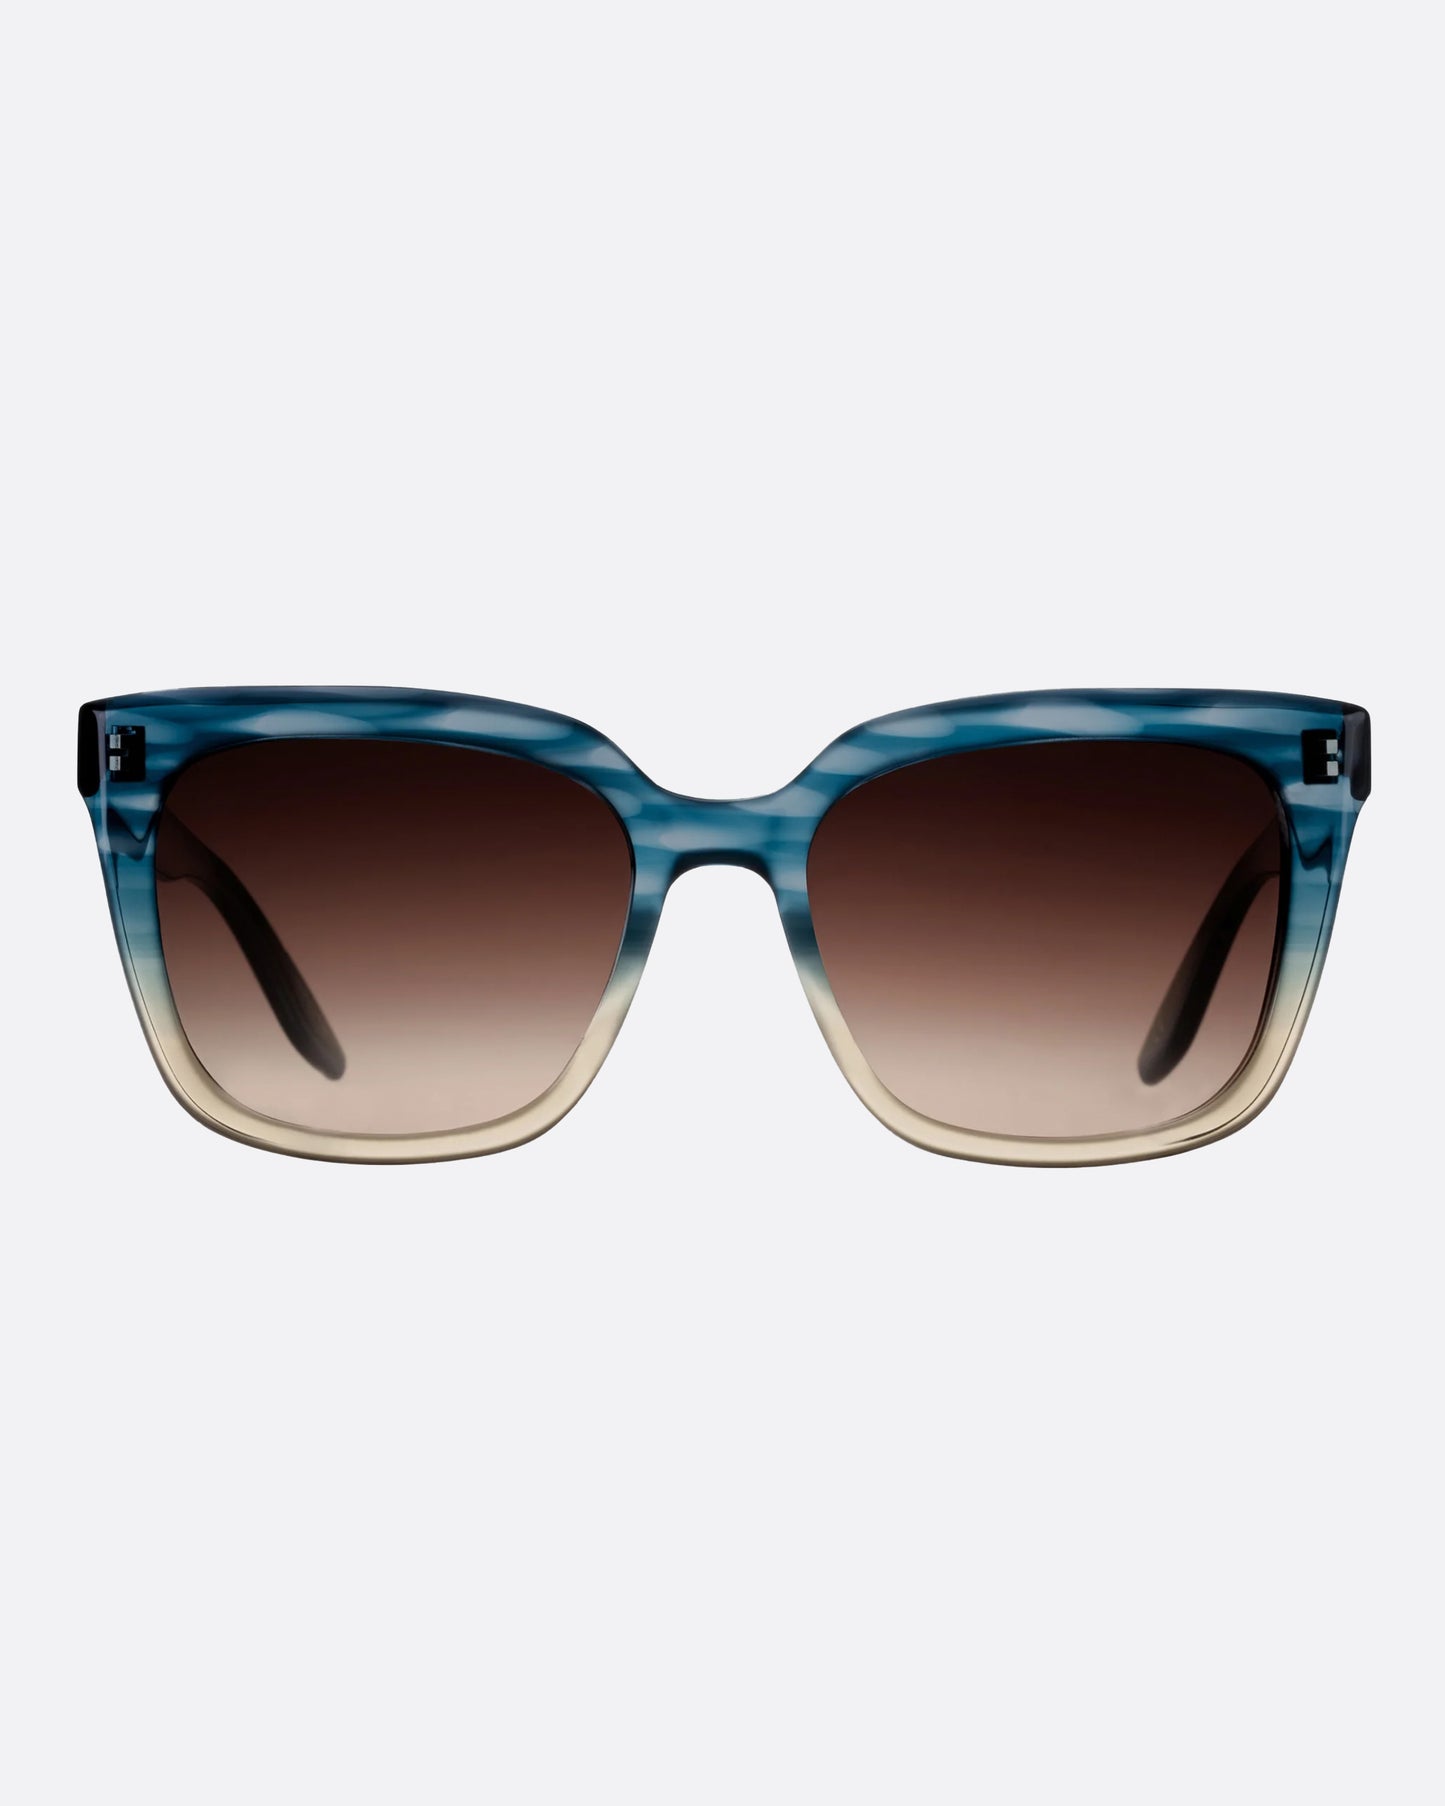 A pair of universally flattering sunglasses, designed to fit almost every face shape.